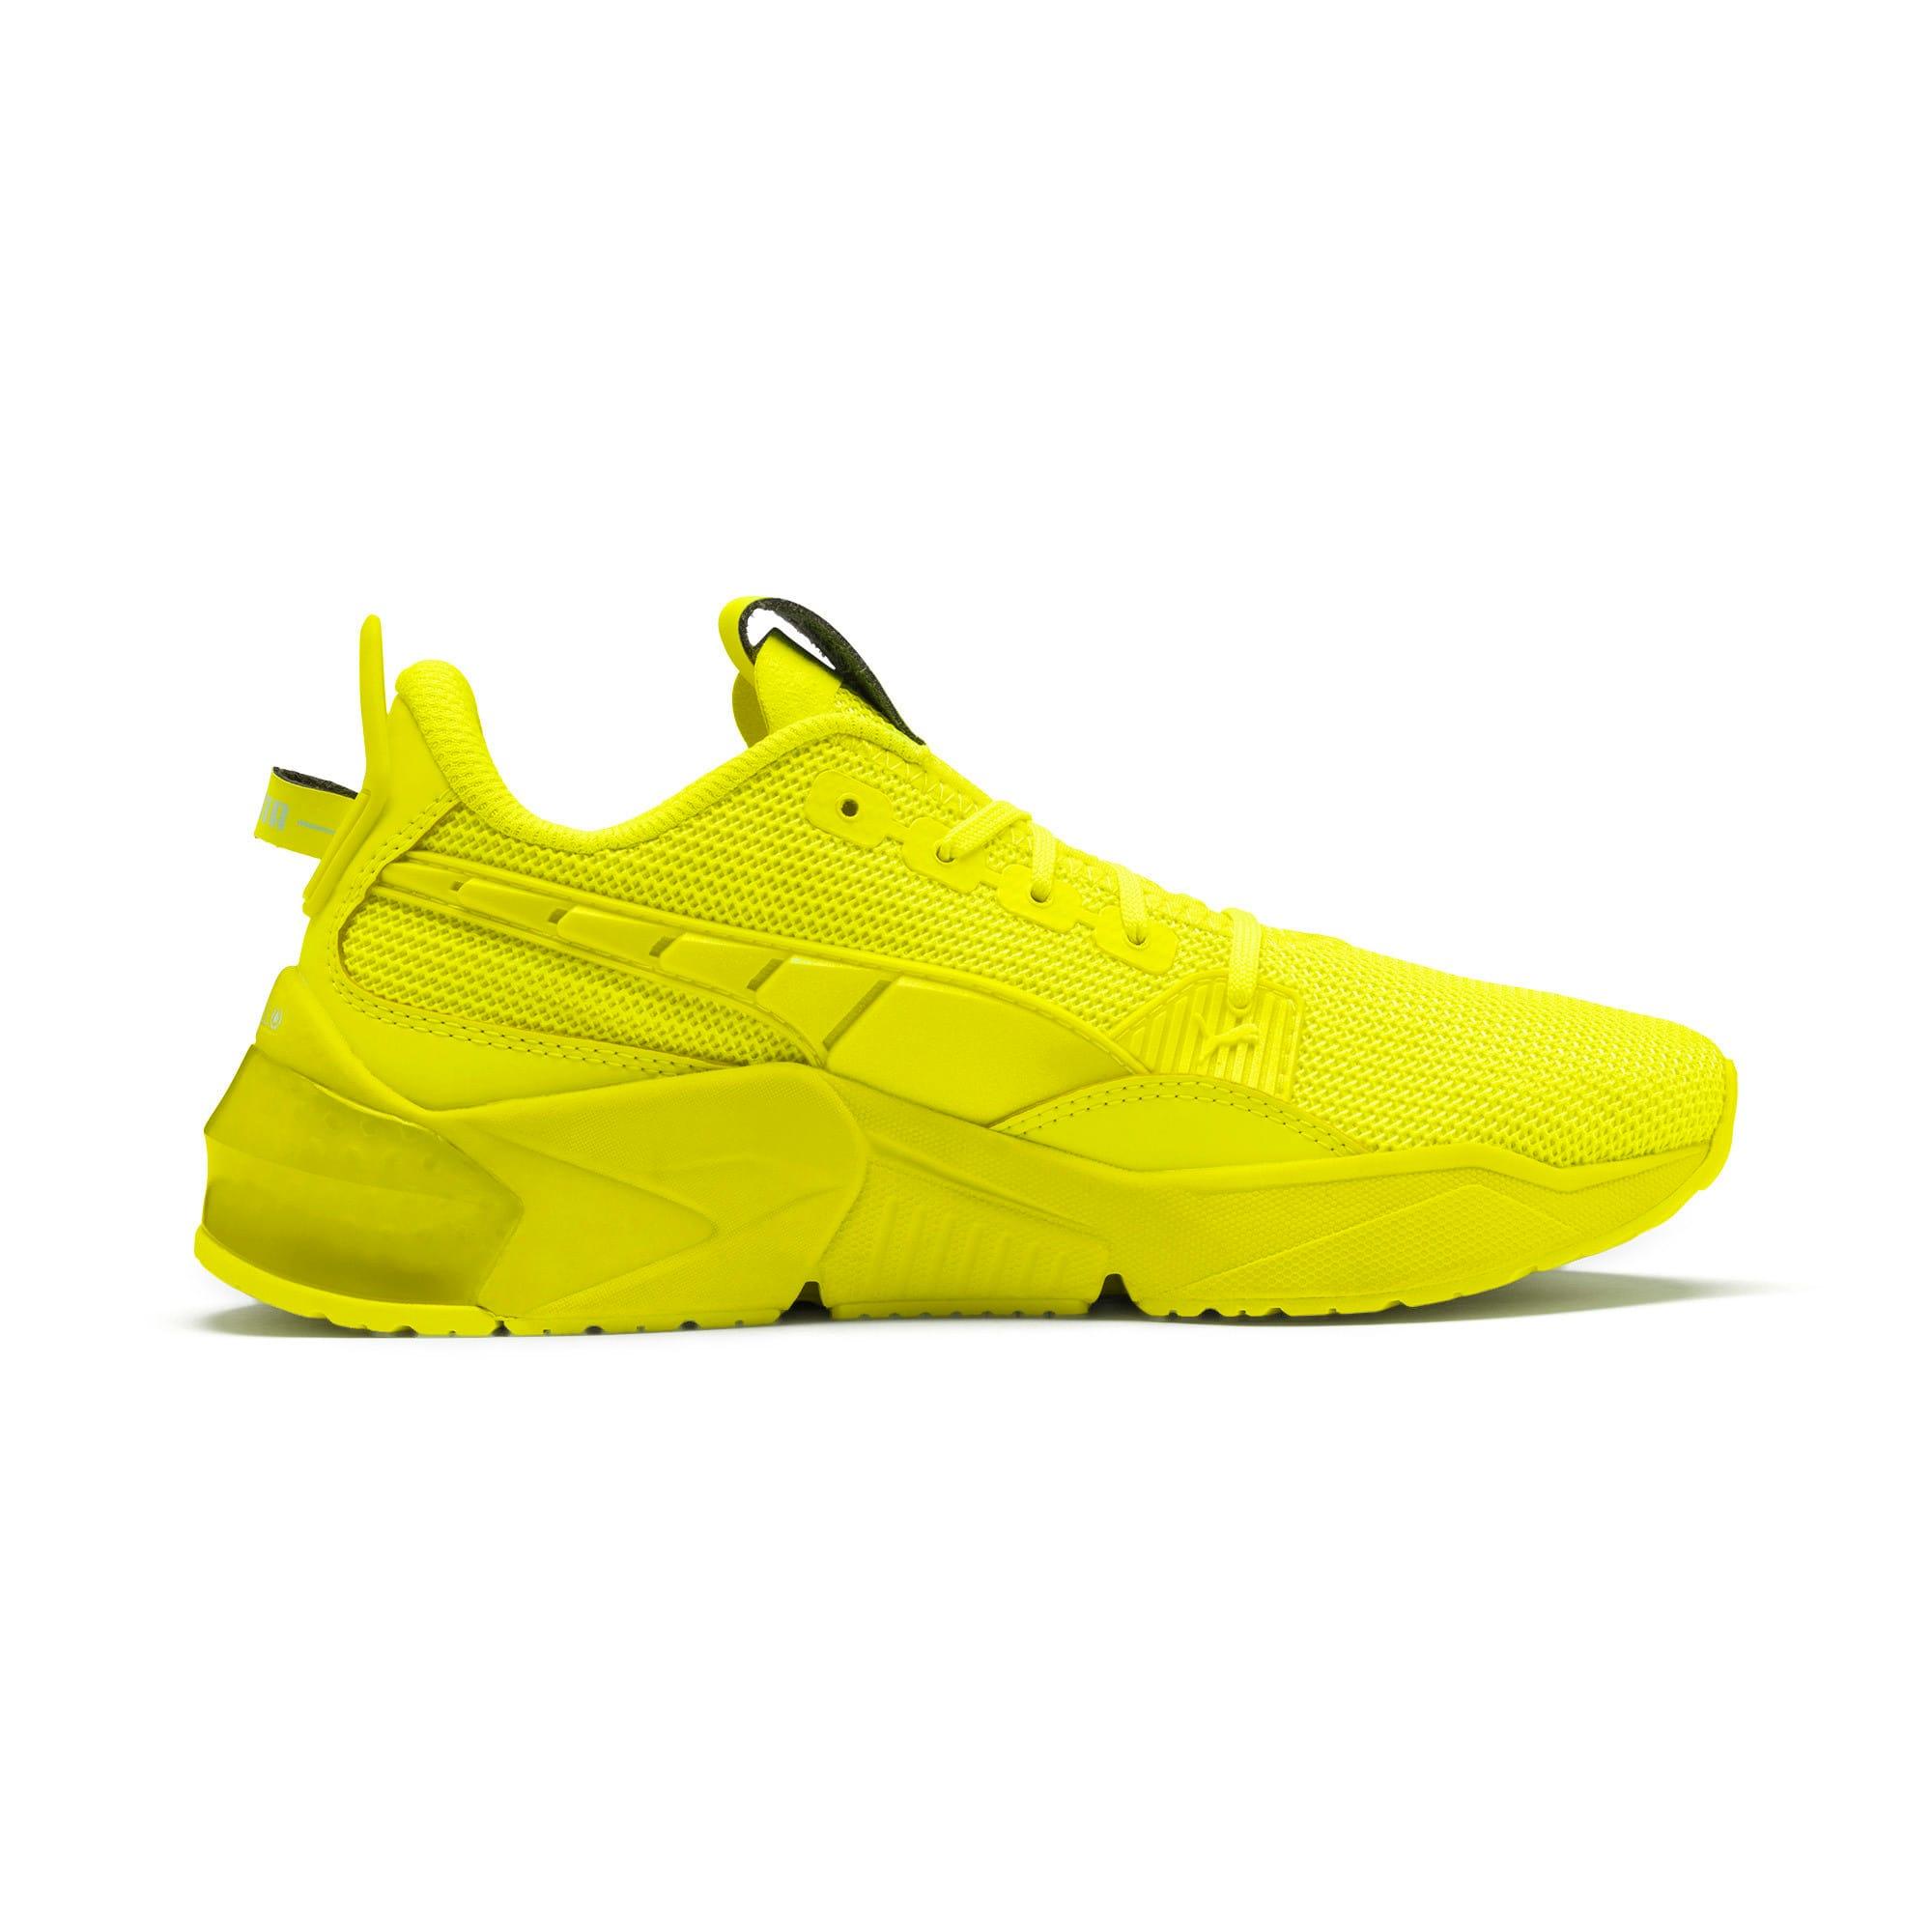 Puma Yellow Shoes Women's Top Sellers, SAVE 36% - aveclumiere.com